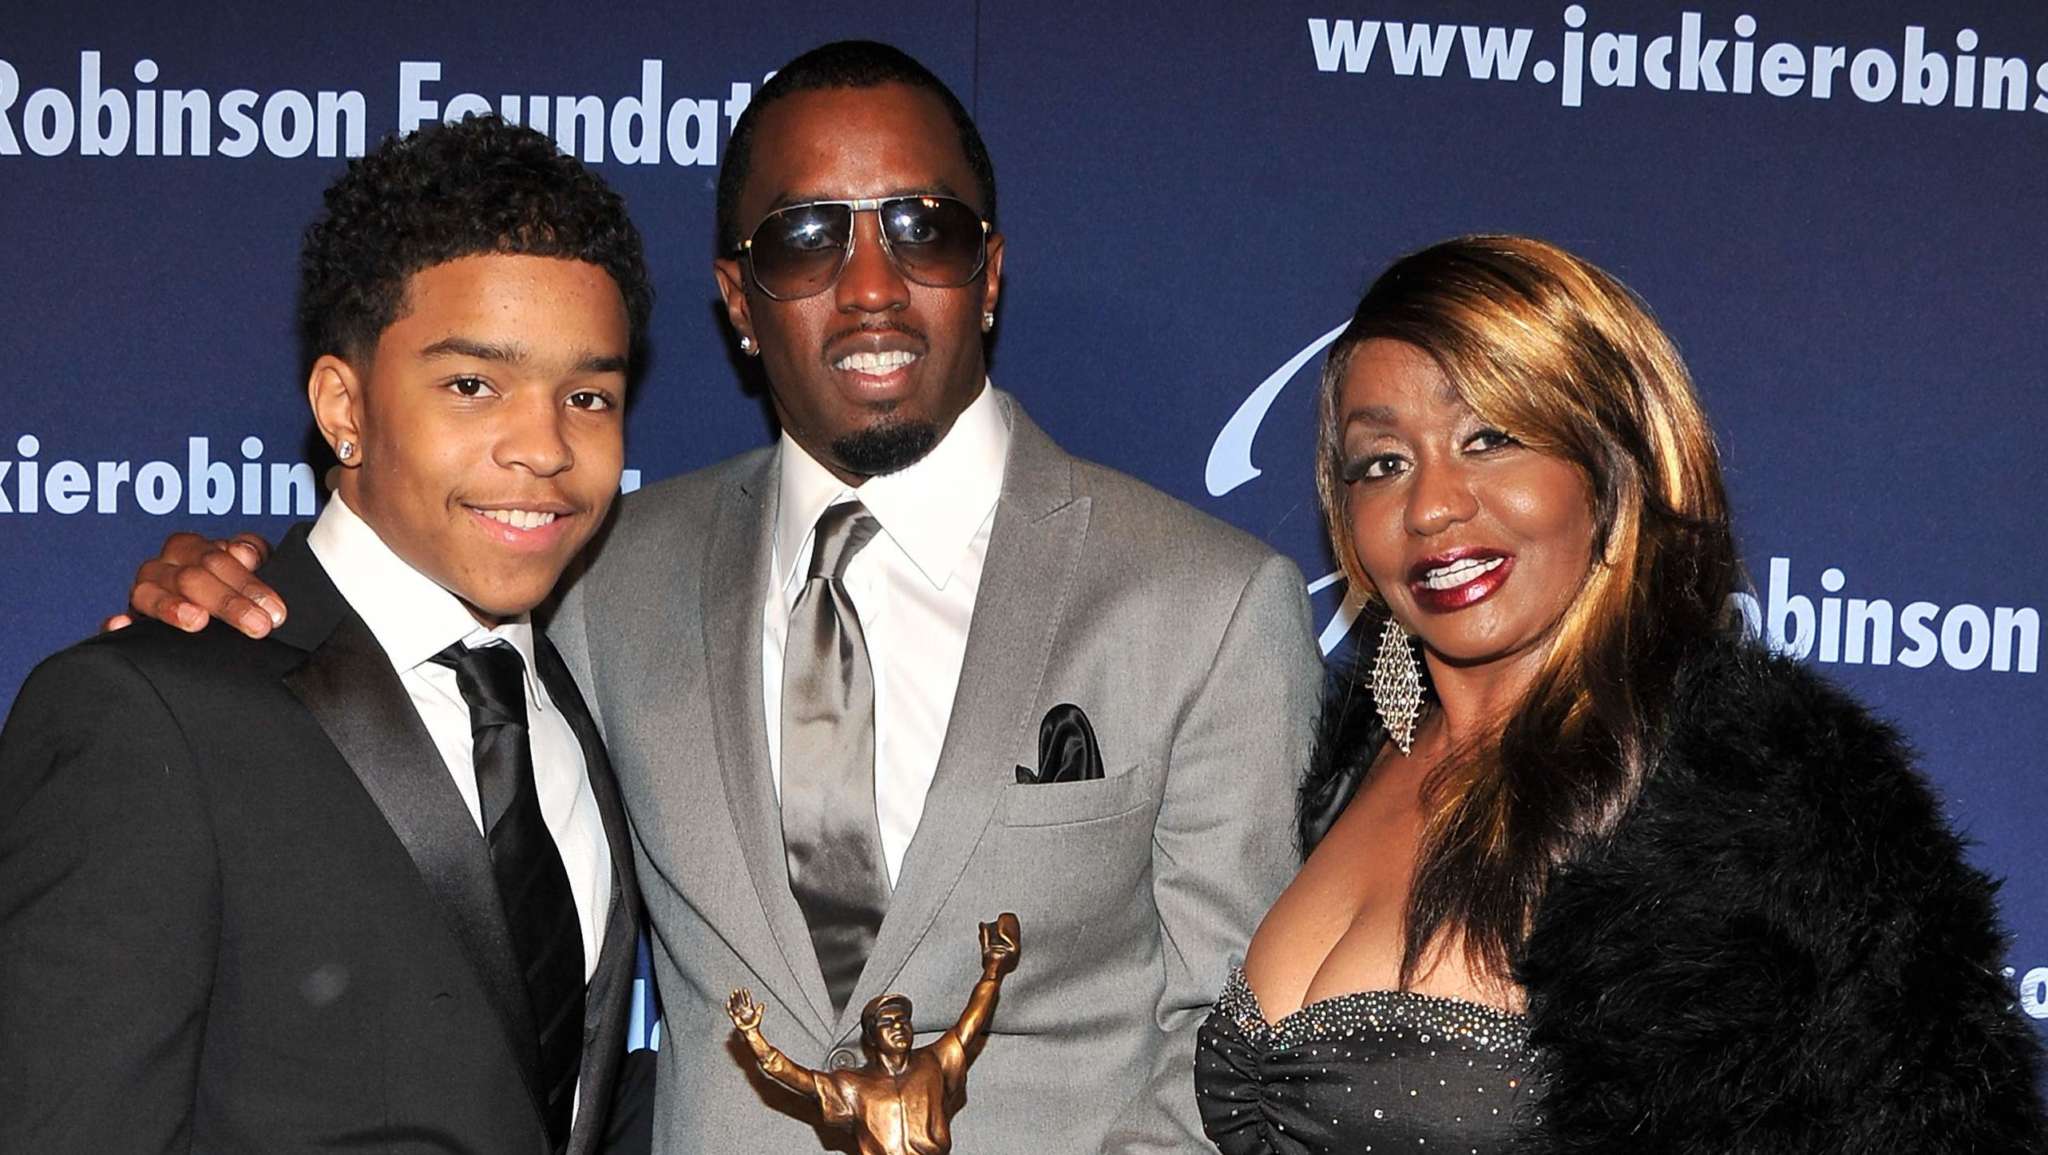 ”diddy-wishes-happy-birthday-to-his-son-justin-combs-and-shares-the-perfect-and-smoothest-way-to-bring-in-the-new-year”